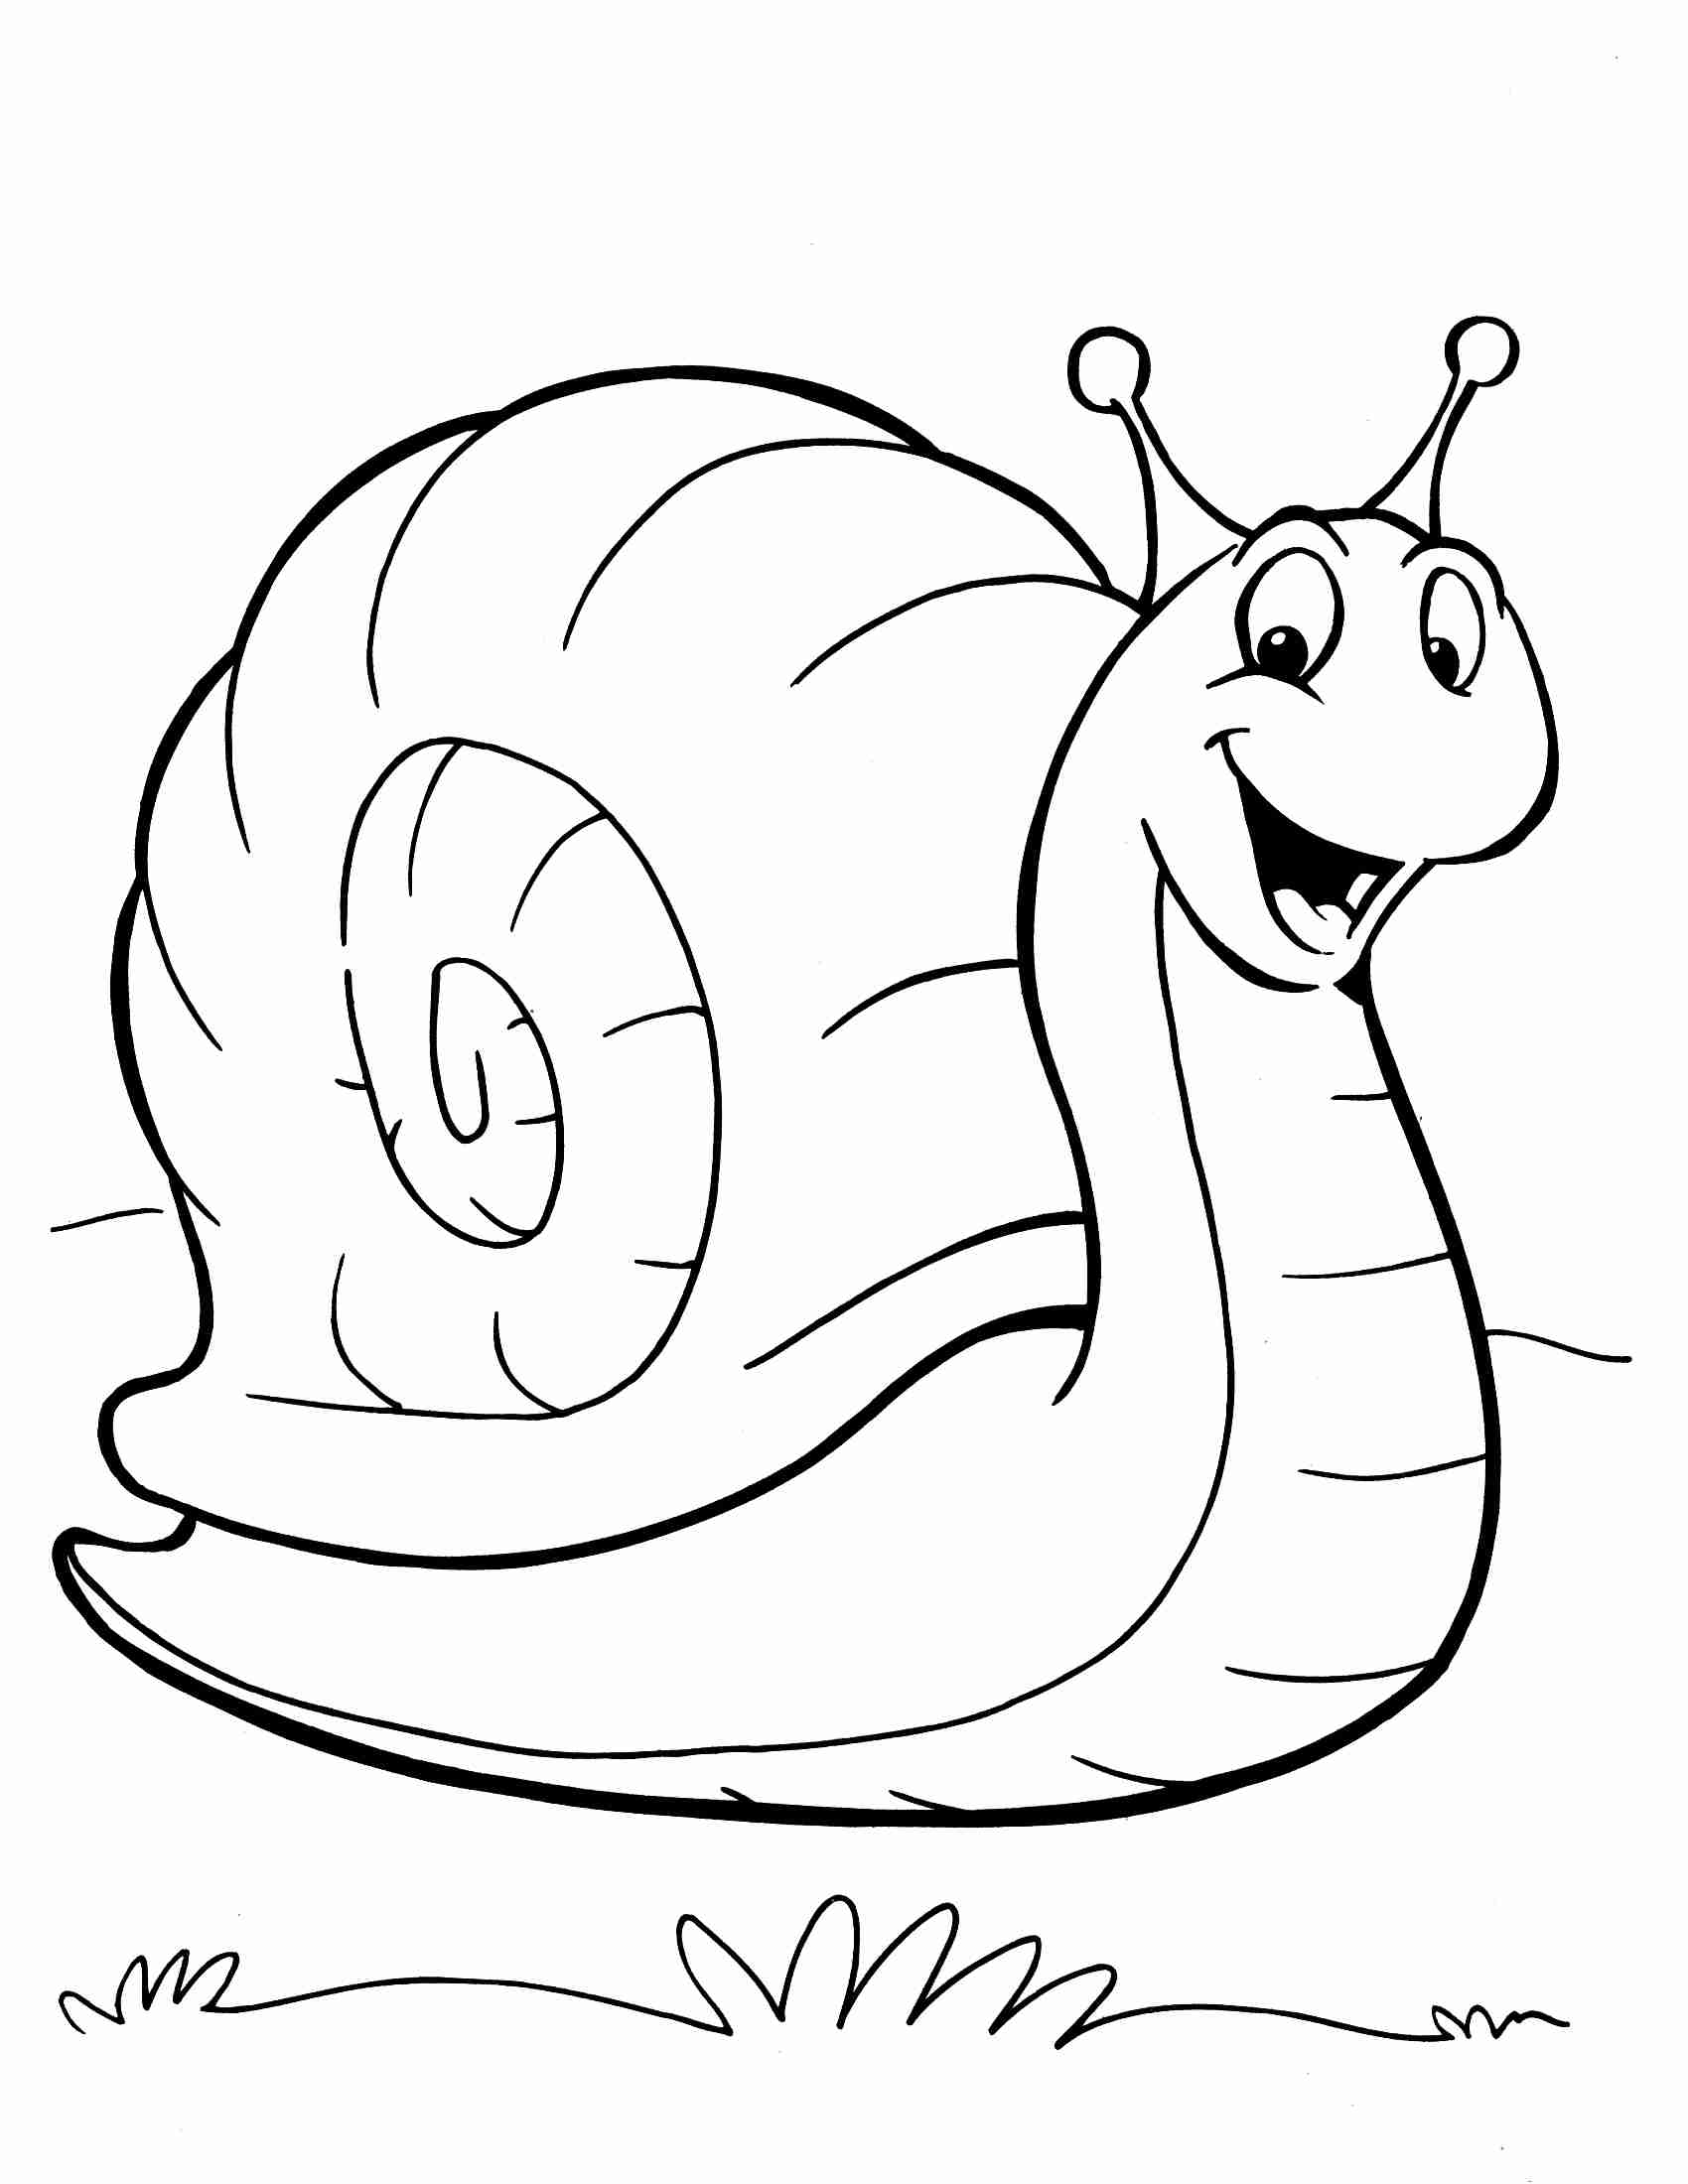 Snail Coloring Page at Free printable colorings